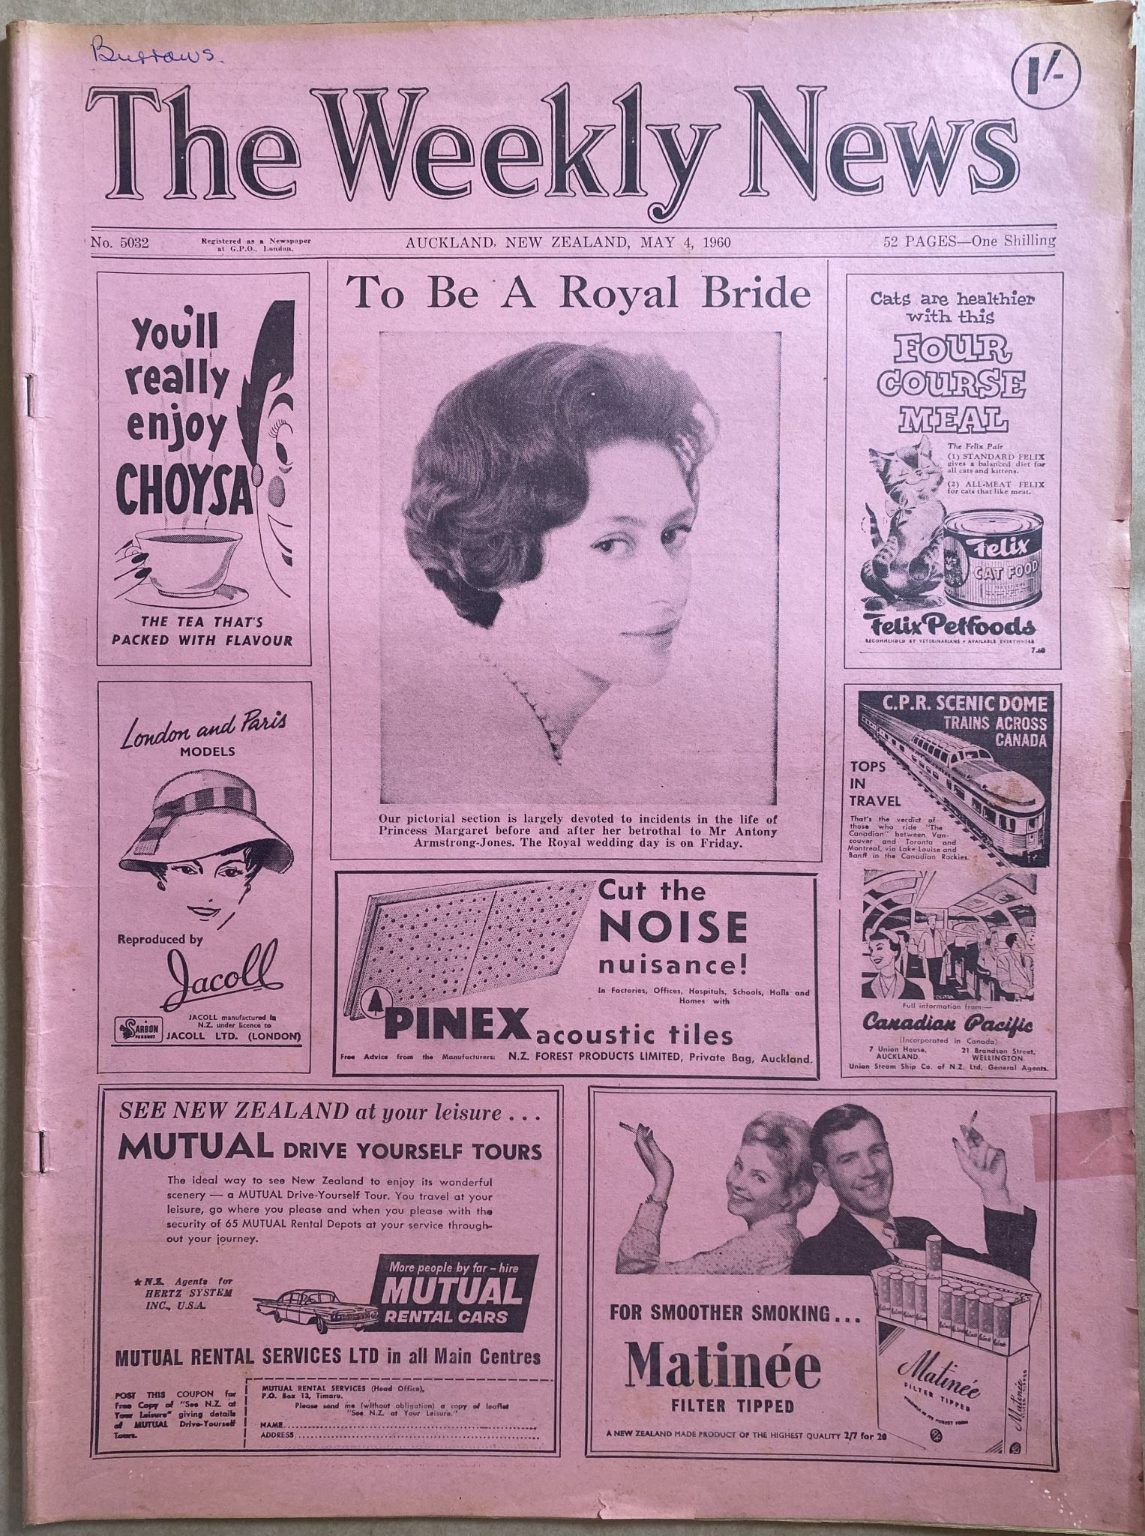 OLD NEWSPAPER: The Weekly News, No. 5032, 4 May 1960